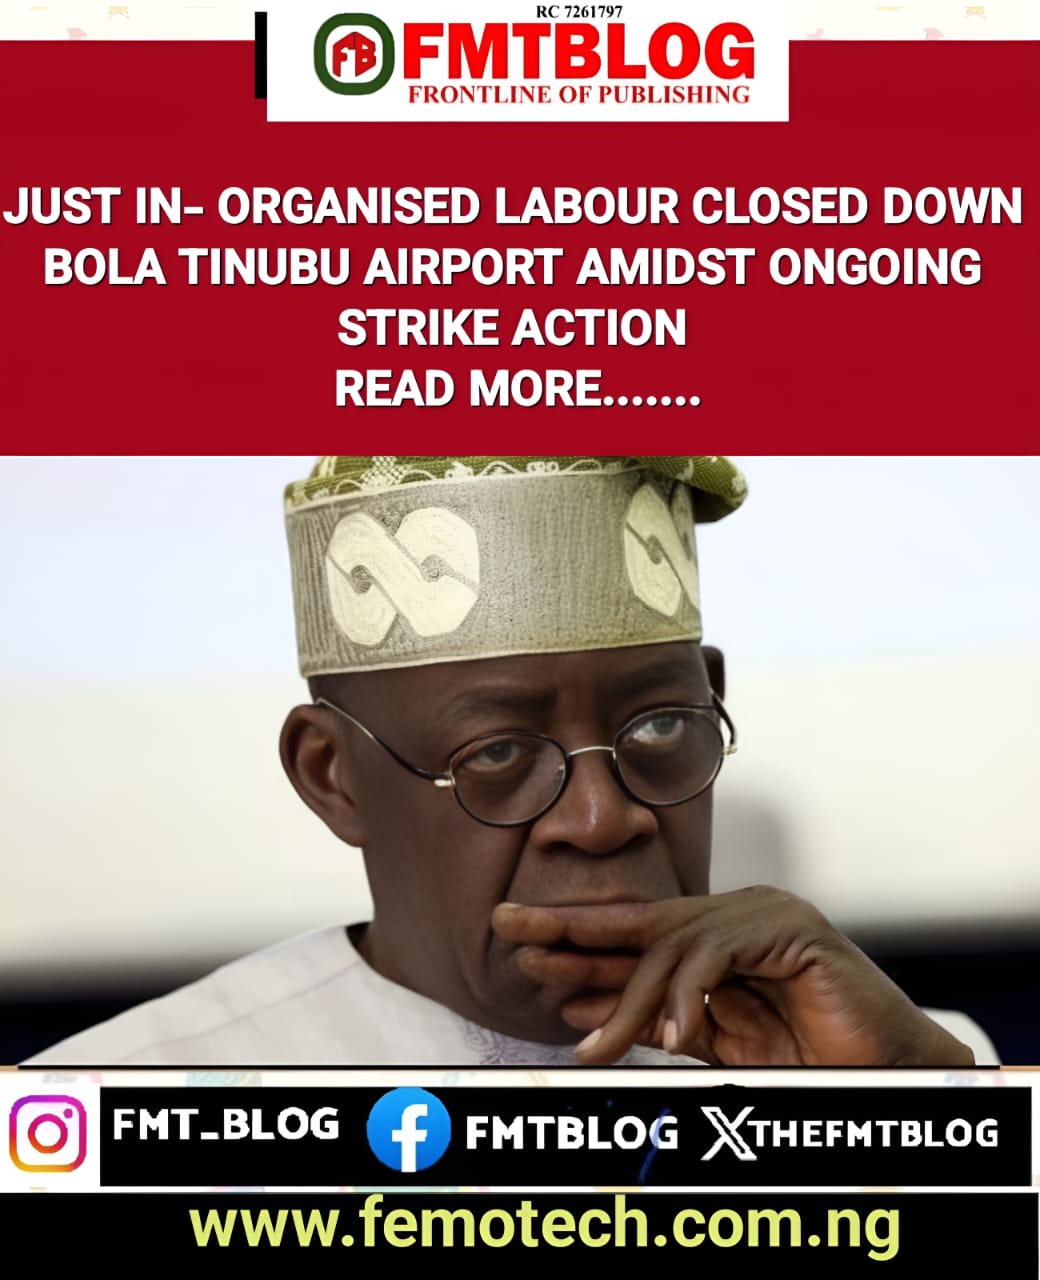 JUST IN- Organised Labour Closed Down Bola Tinubu Airport (VIDEO)